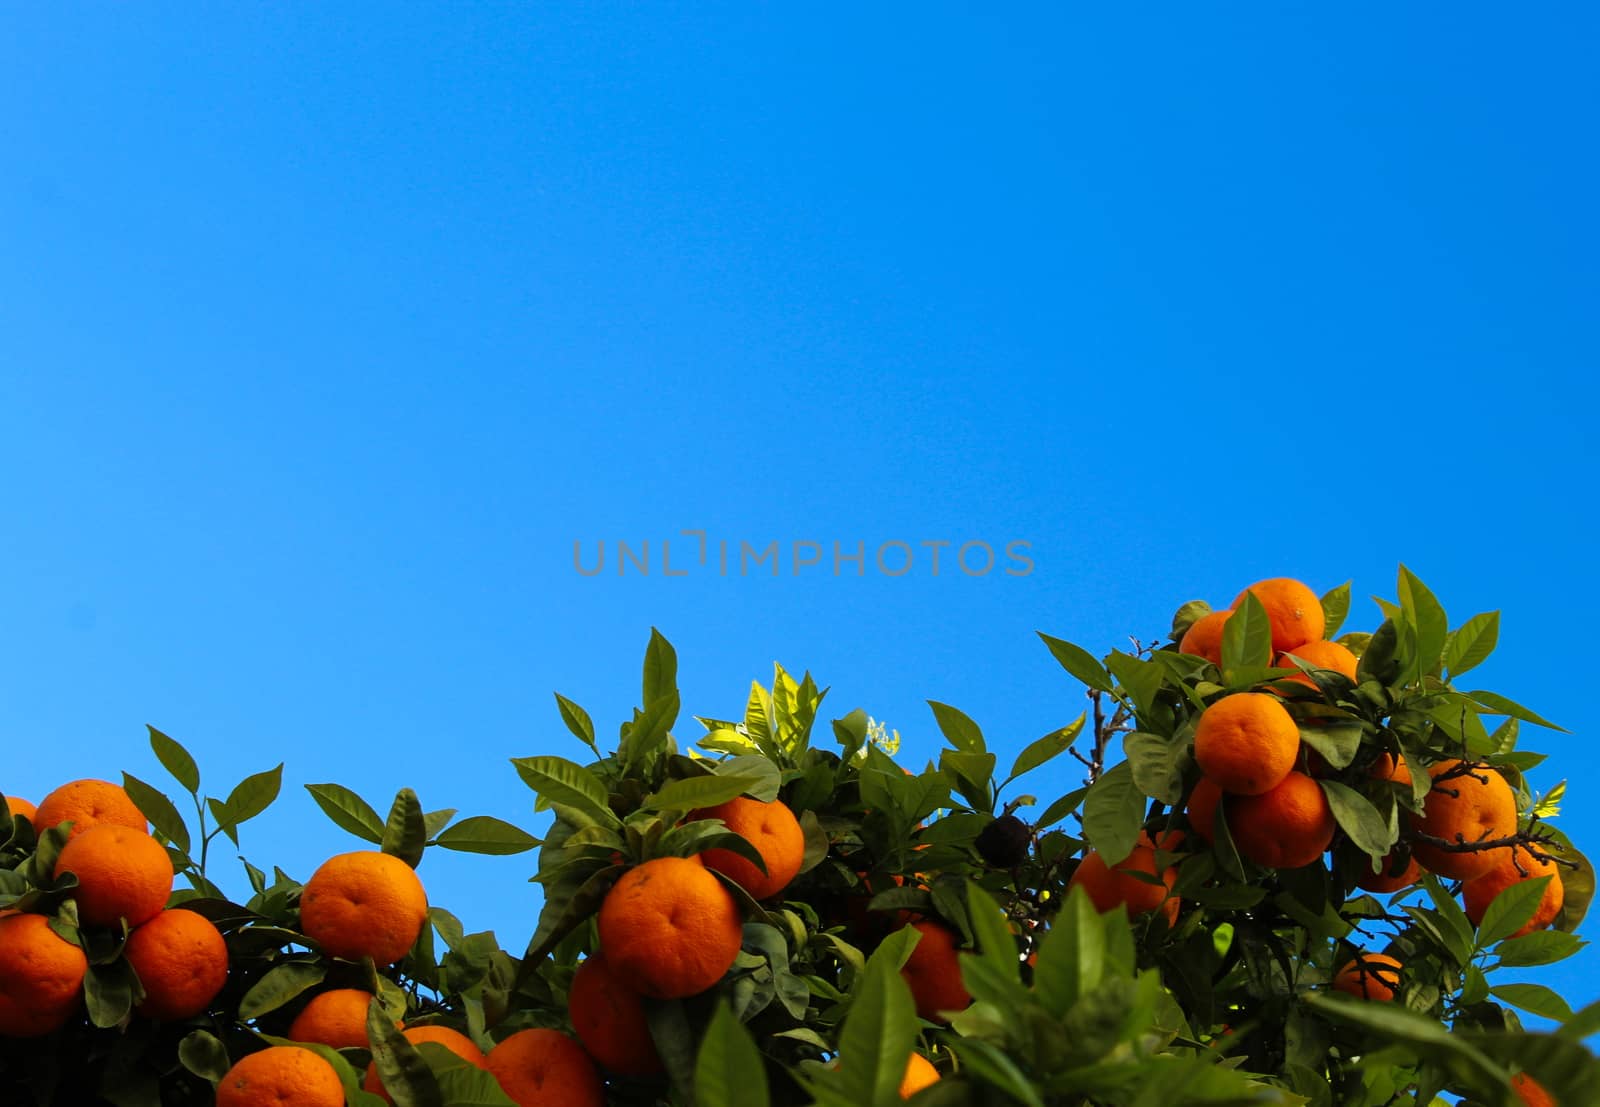 Ripe mandarin fruits with green leaves in between opposite the clear blue sky. Ripe fruits of mandarin - citrus. Faro, Portugal.